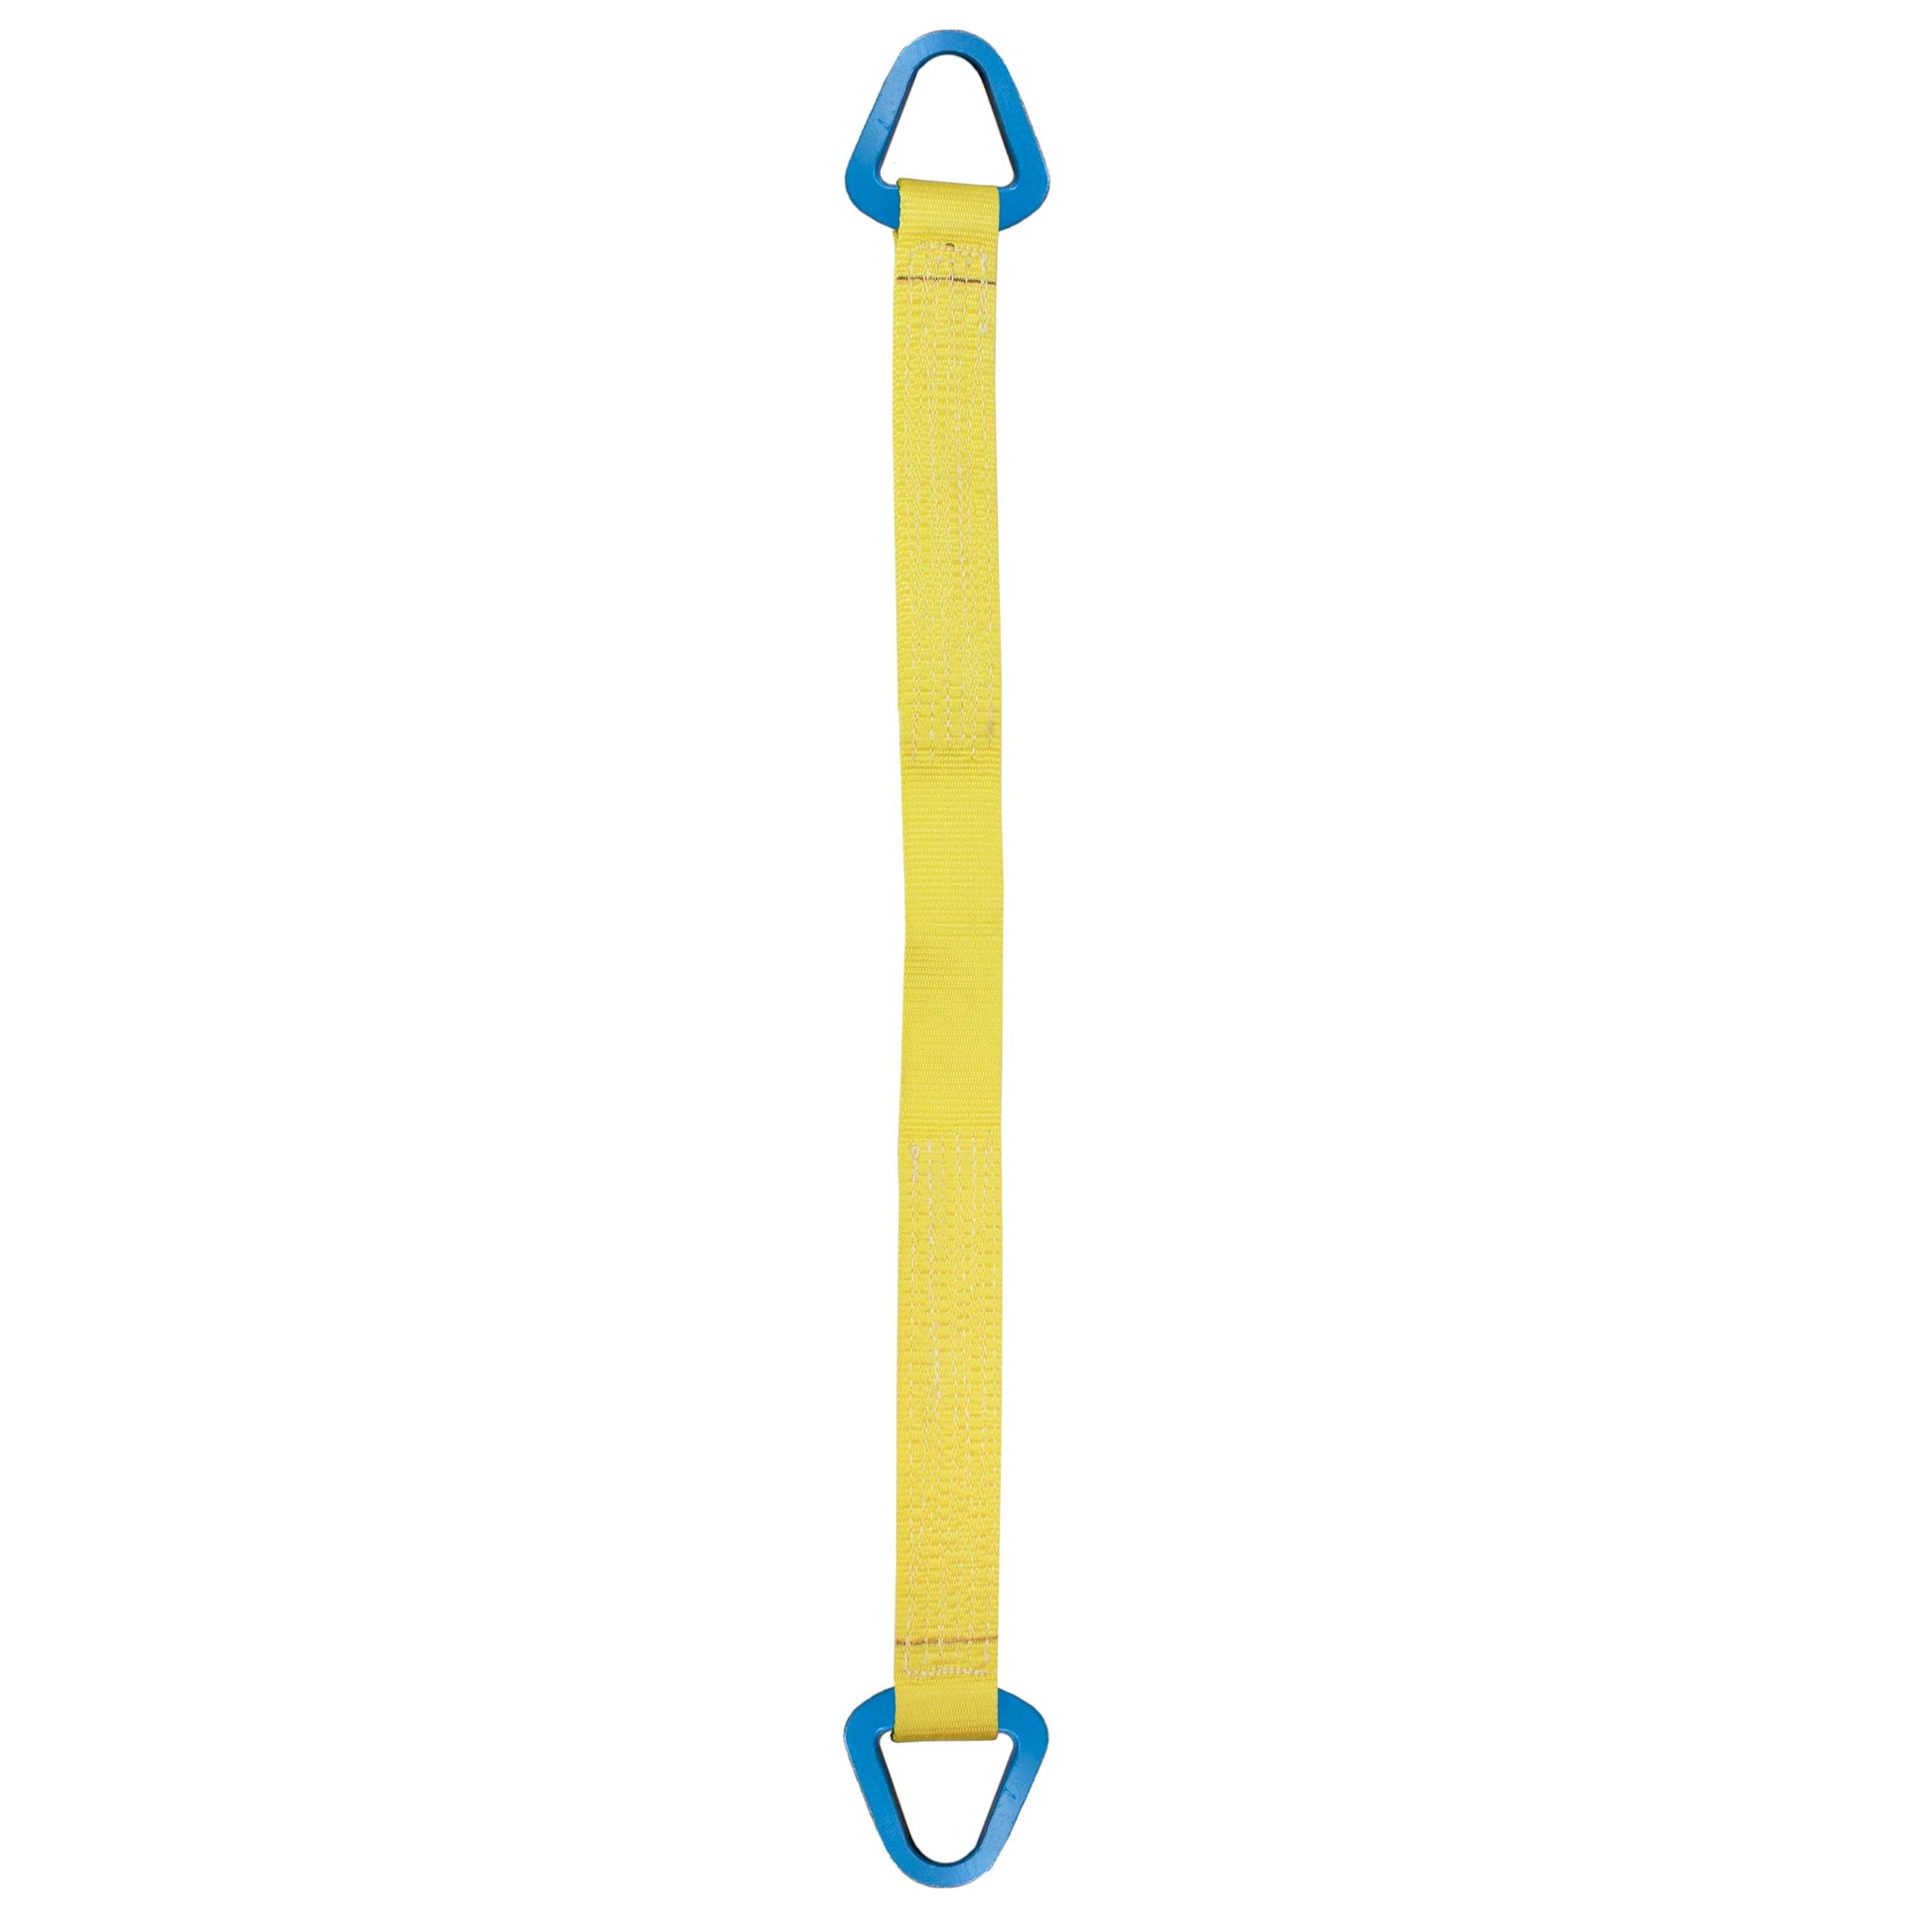 Nylon Lifting Sling Triangle 2 inch x 6 foot 1ply image 1 of 2